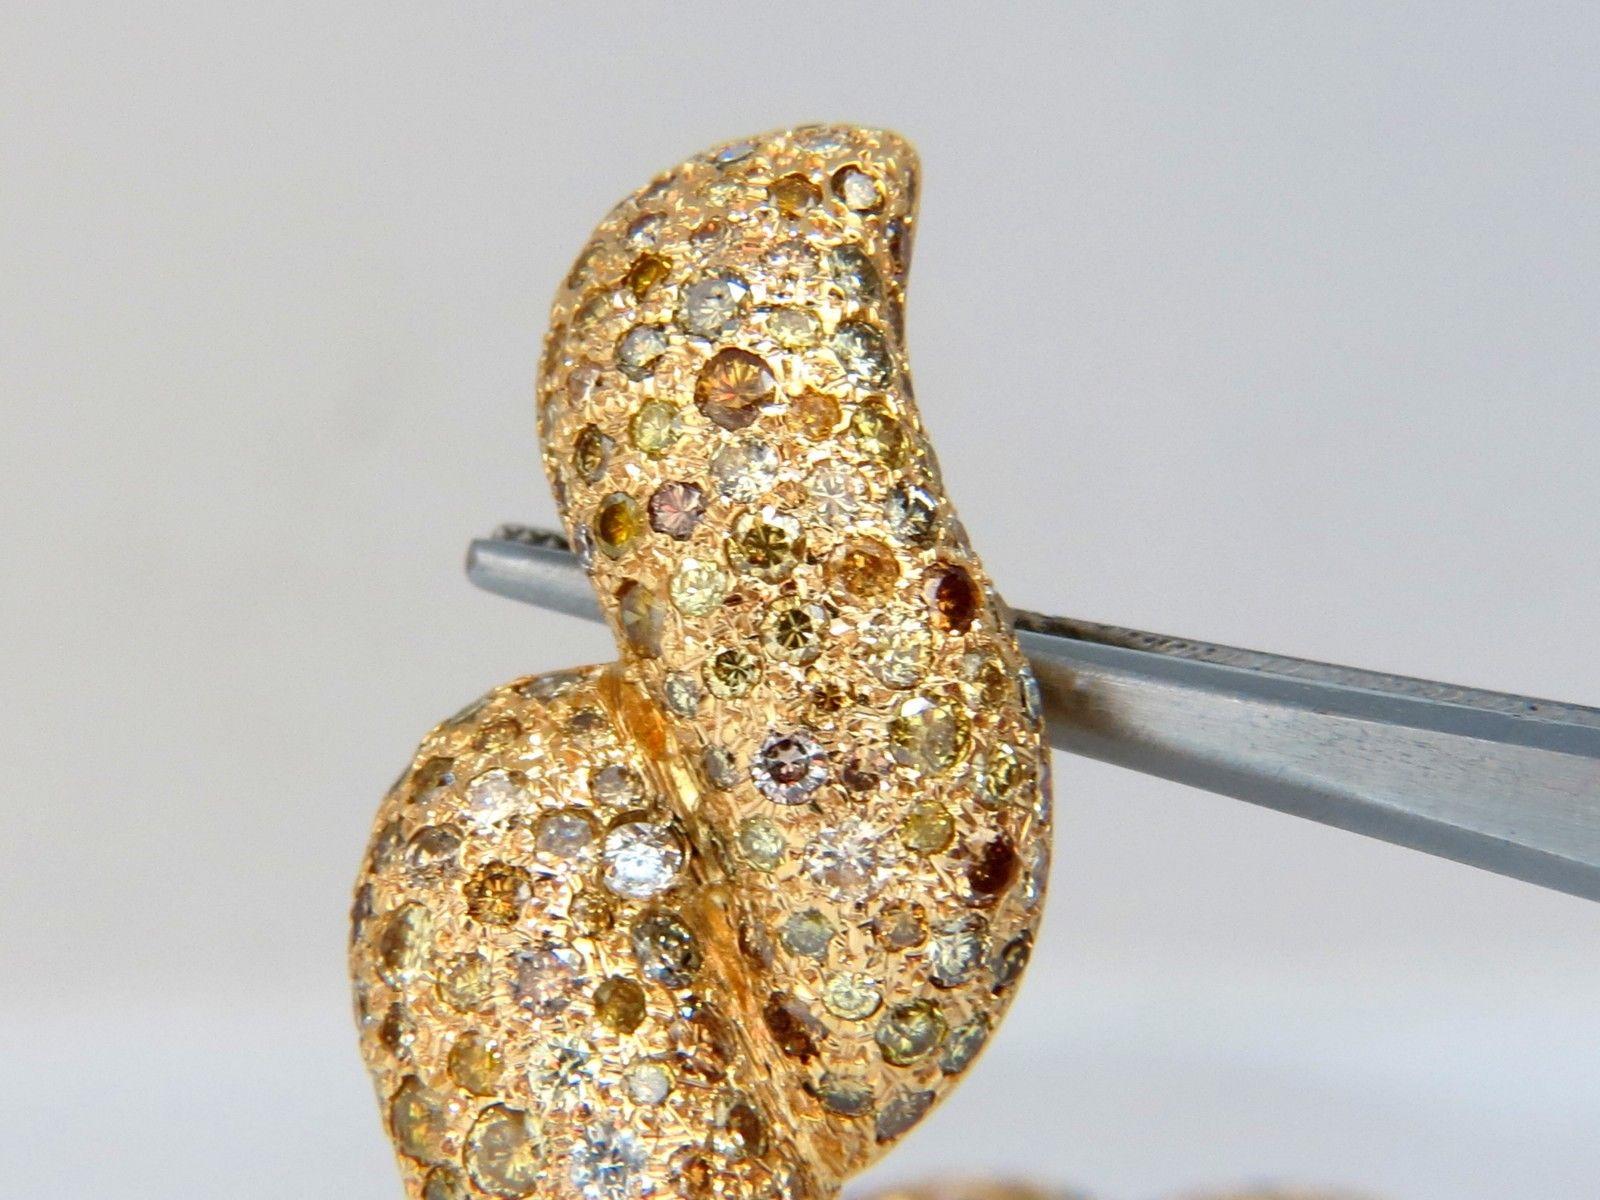 11ct. Natural Fancy color diamonds clip earrings.

Fancy Yellow, Orange, Brown, and olive.

Vs-1 Vs-2 & Si-1 clarity.

Rounds, full cuts.

14kt. yellow gold.

1.9 x .78 inch

Comfortable omega clips.

$24,000 appraisal will accompany